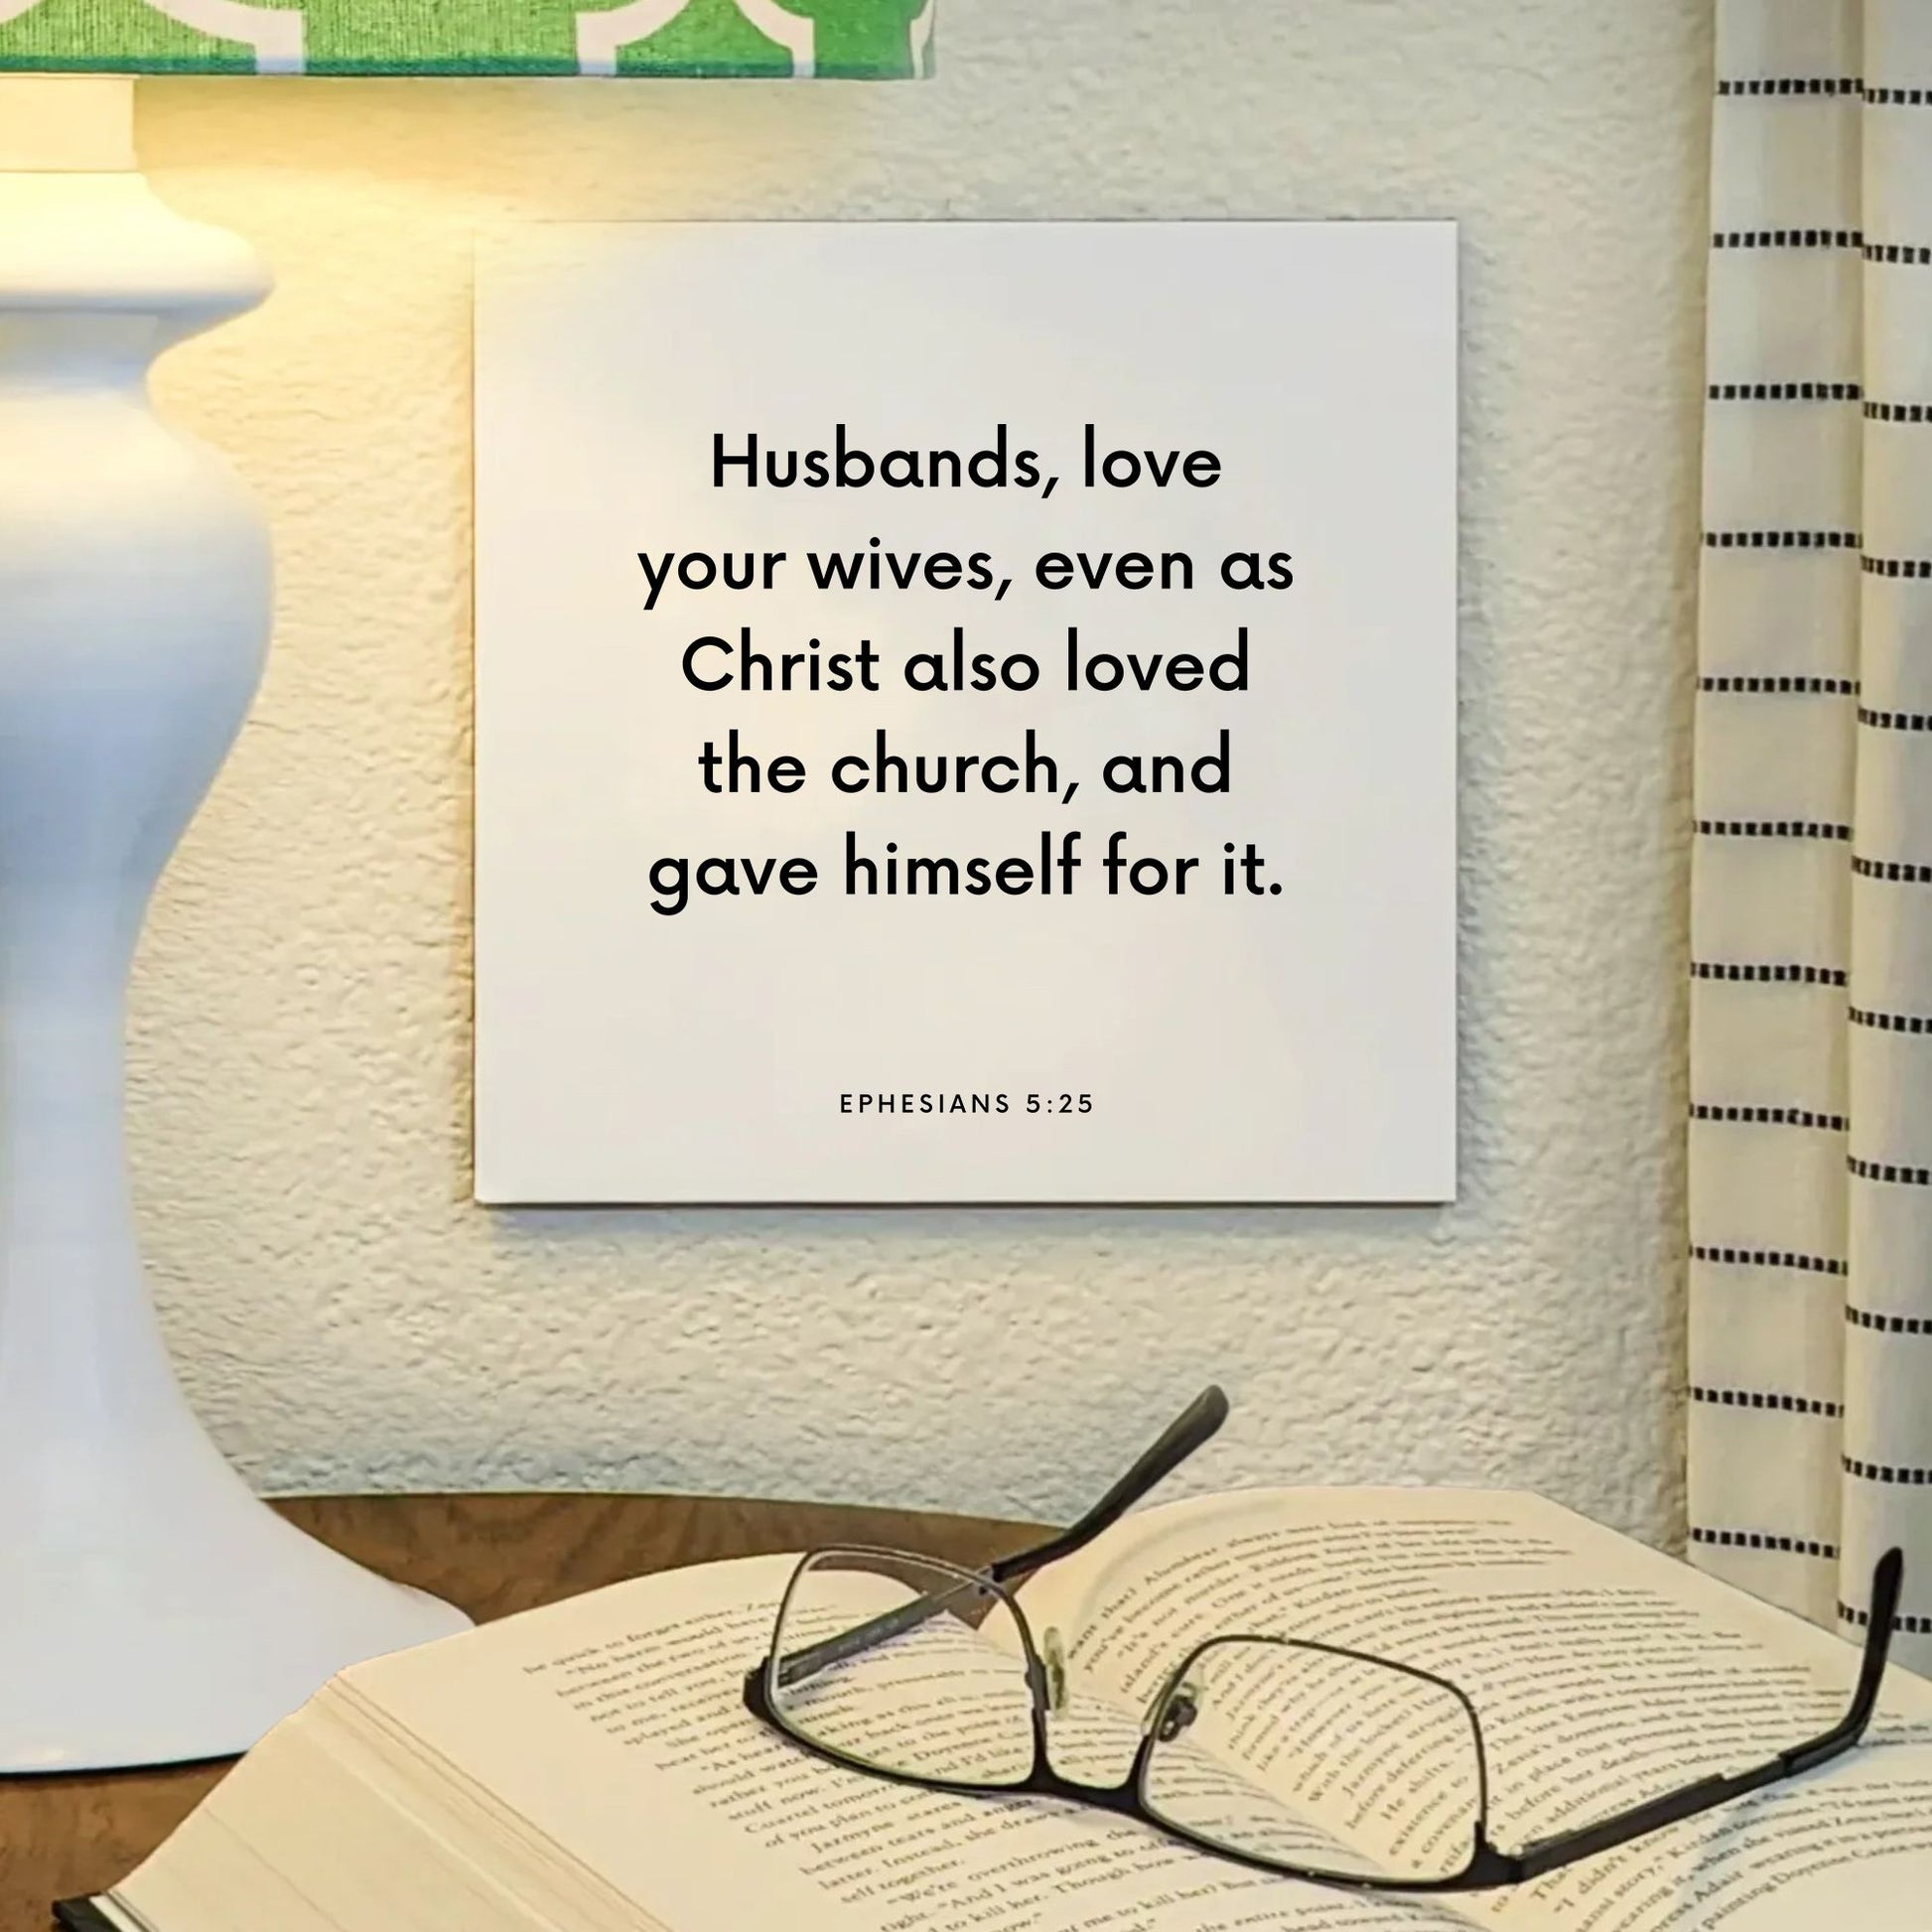 Lamp mouting of the scripture tile for Ephesians 5:25 - "Husbands, love your wives, even as Christ loved the church"